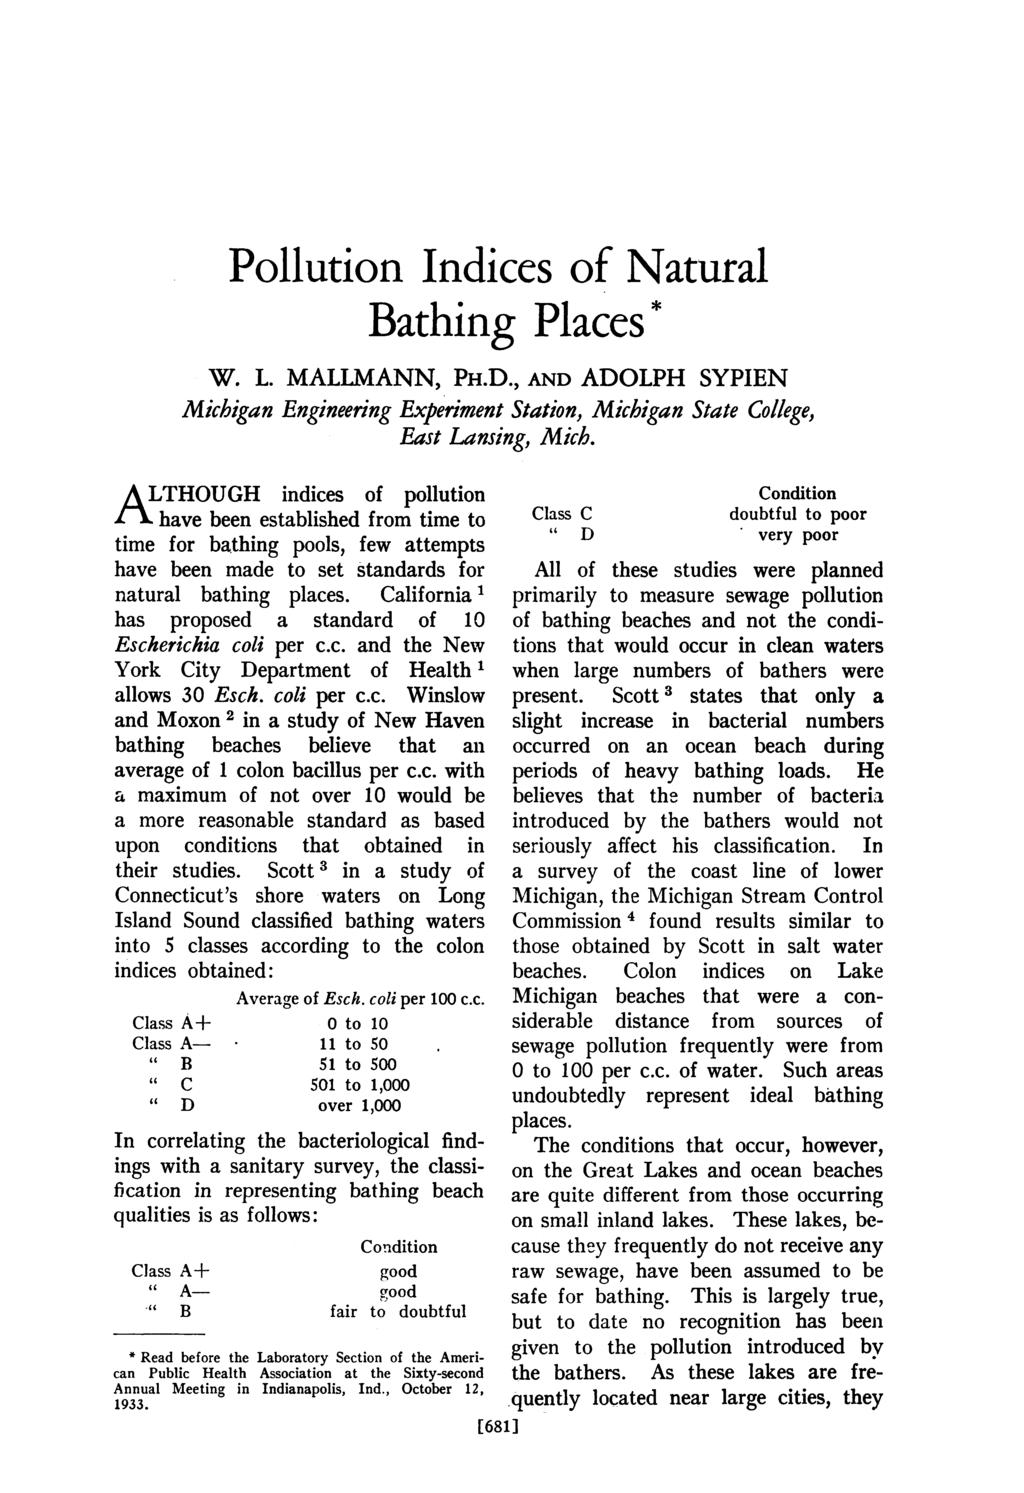 Pollution Indices of Natural Bathing Places* W. L. MALLMANN, PH.D., AND ADOLPH SYPIEN Michigan Engineering Experiment Station, Michigan State East Lansing, Mich.